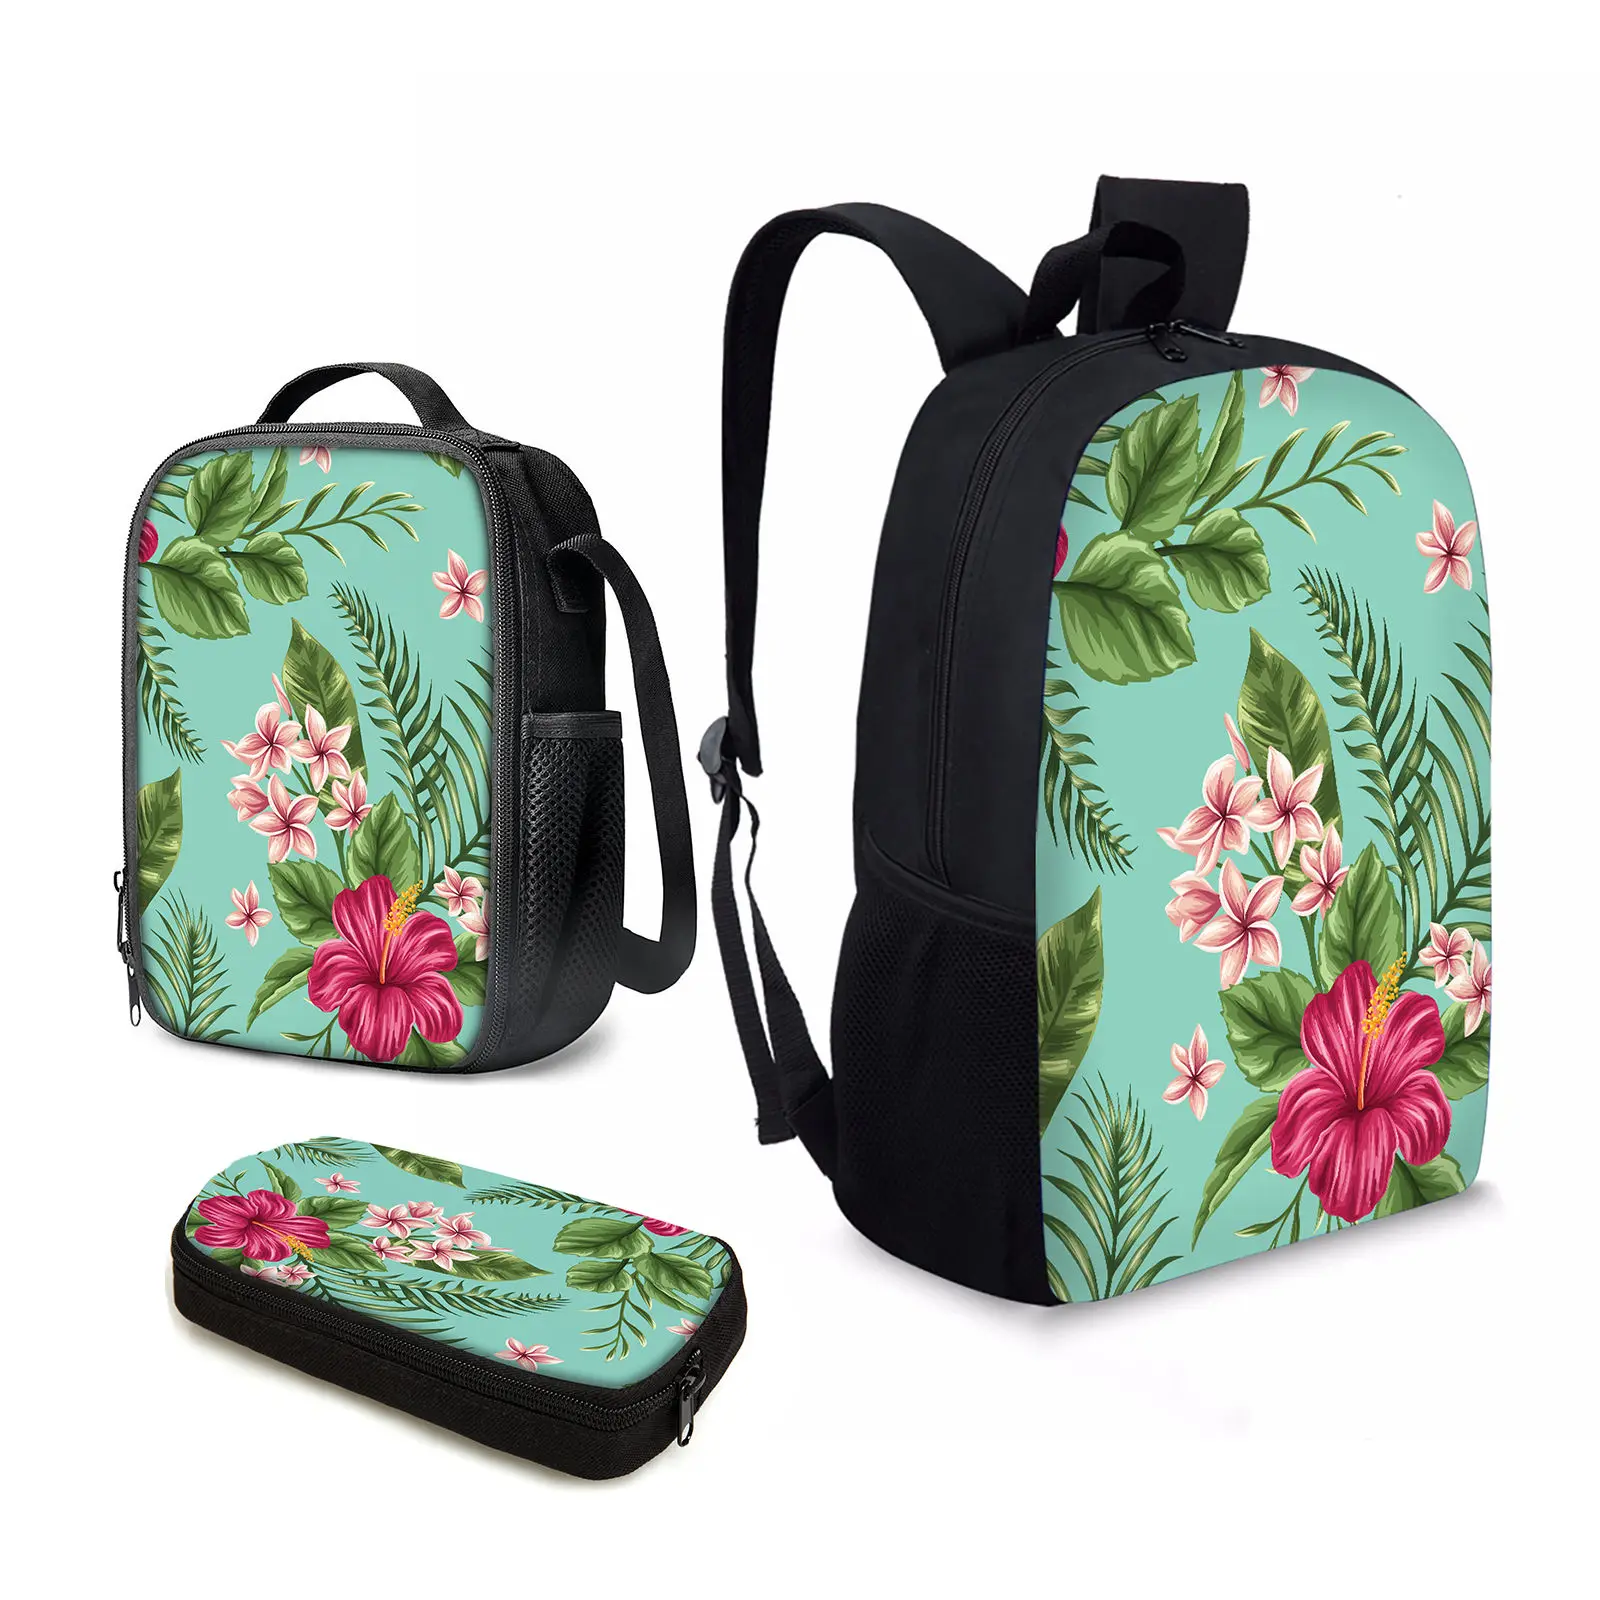 

YIKELUO Tropical Floral Design Waterproof Travel Bag With Zipper Hibiscus/Plumeria Print Stylish Lounge Bag Backpack Lunch Bag